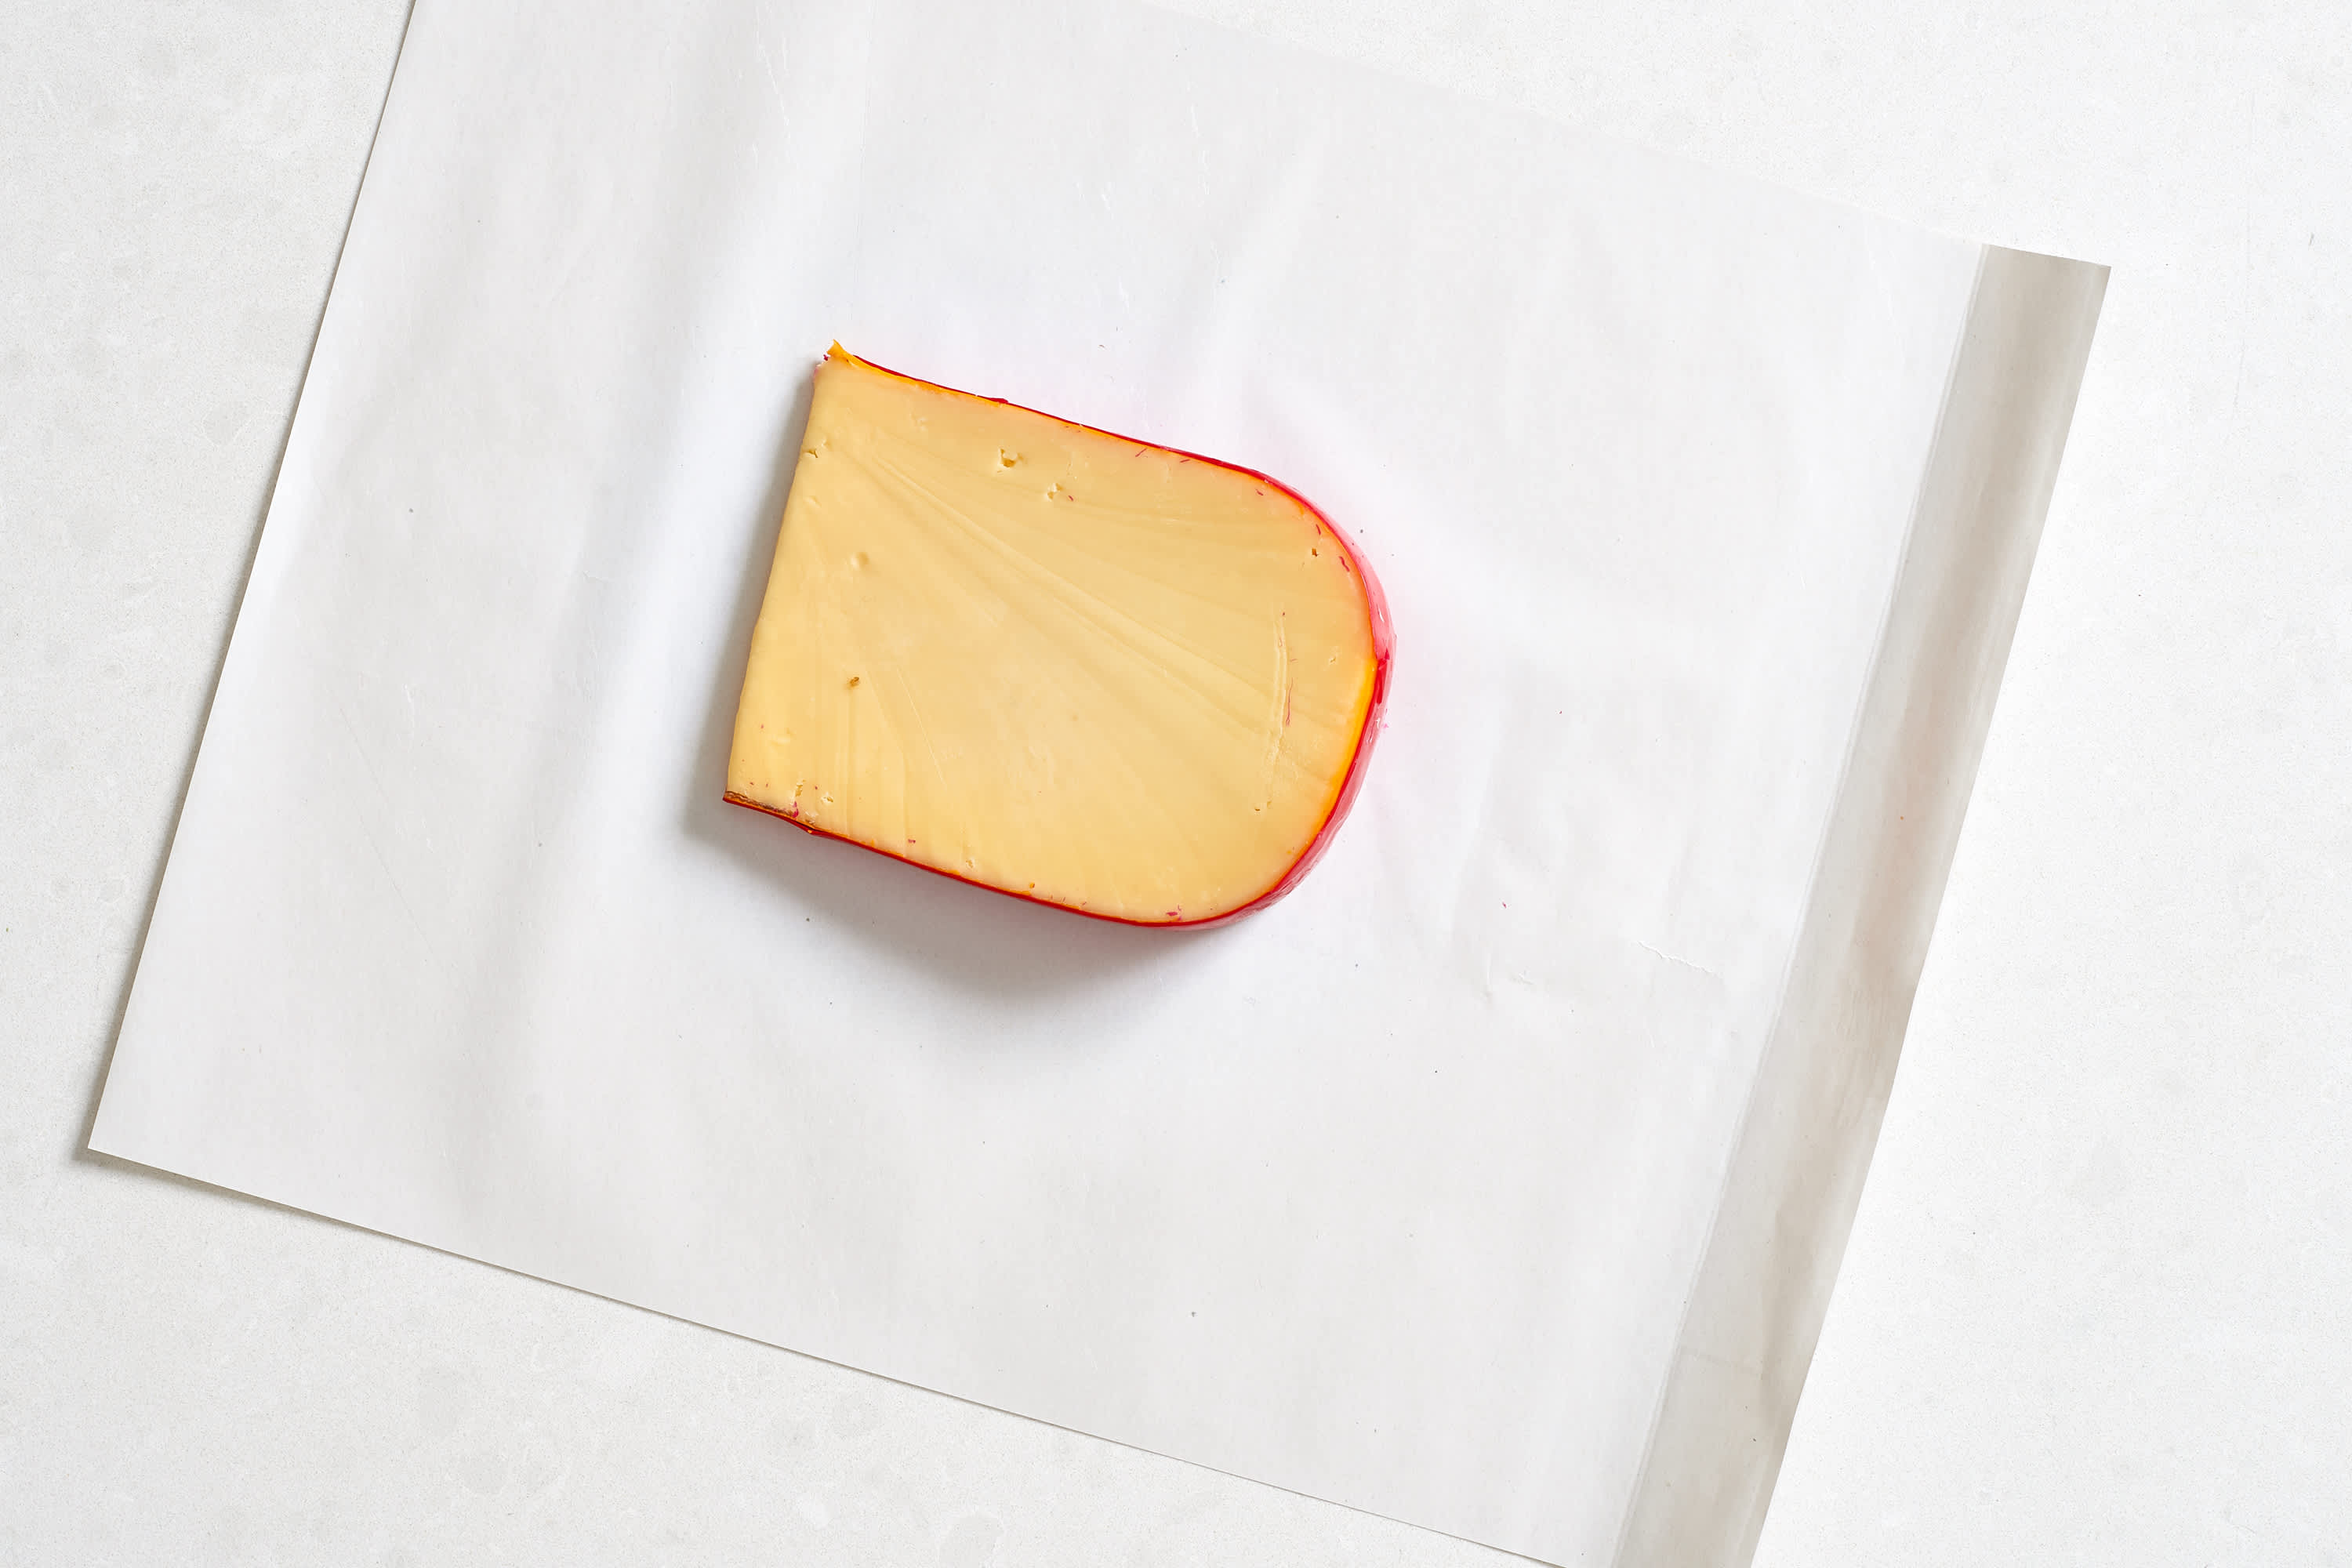 How To Wrap & Store Your Cheese Like a Pro